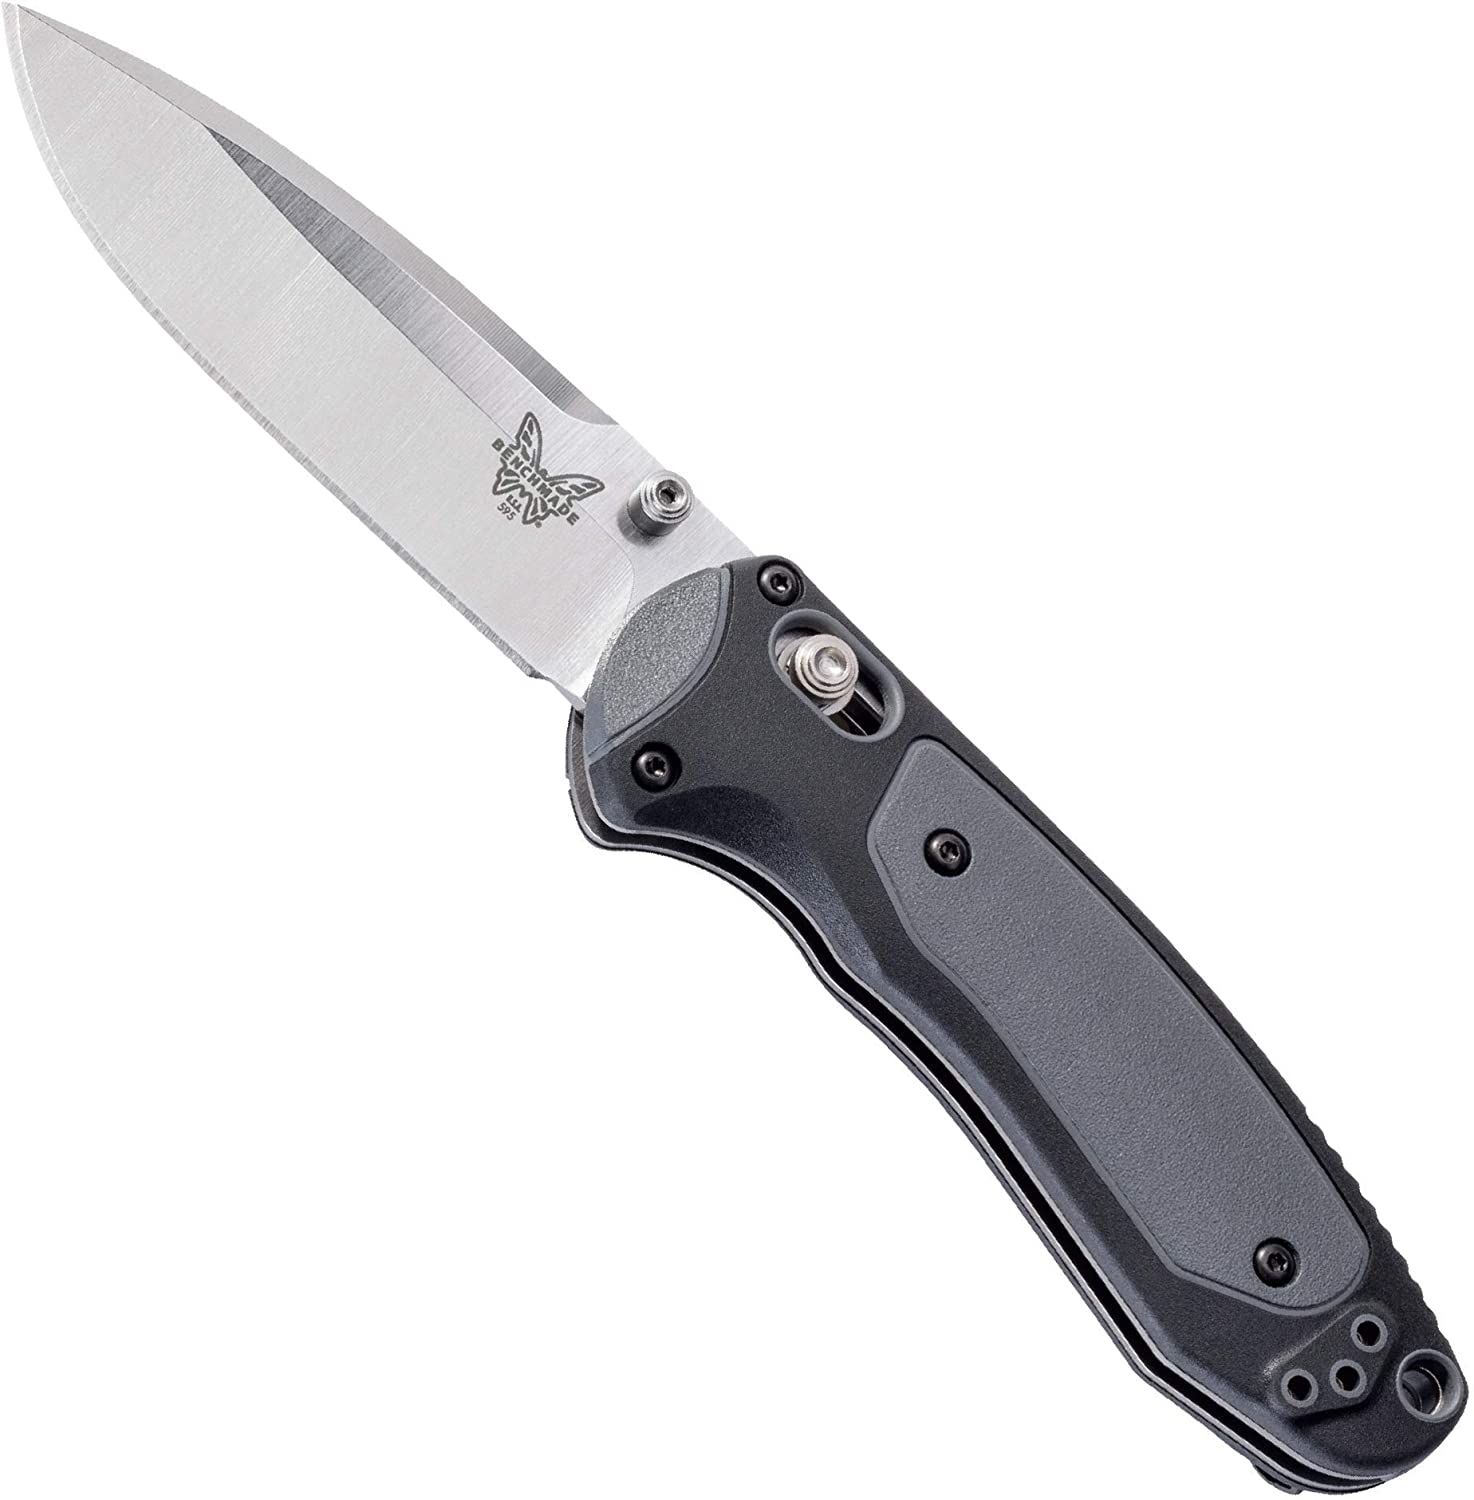 Benchmade – Mini Boost 595 Knife, Drop-Point Blade, Made in The USA